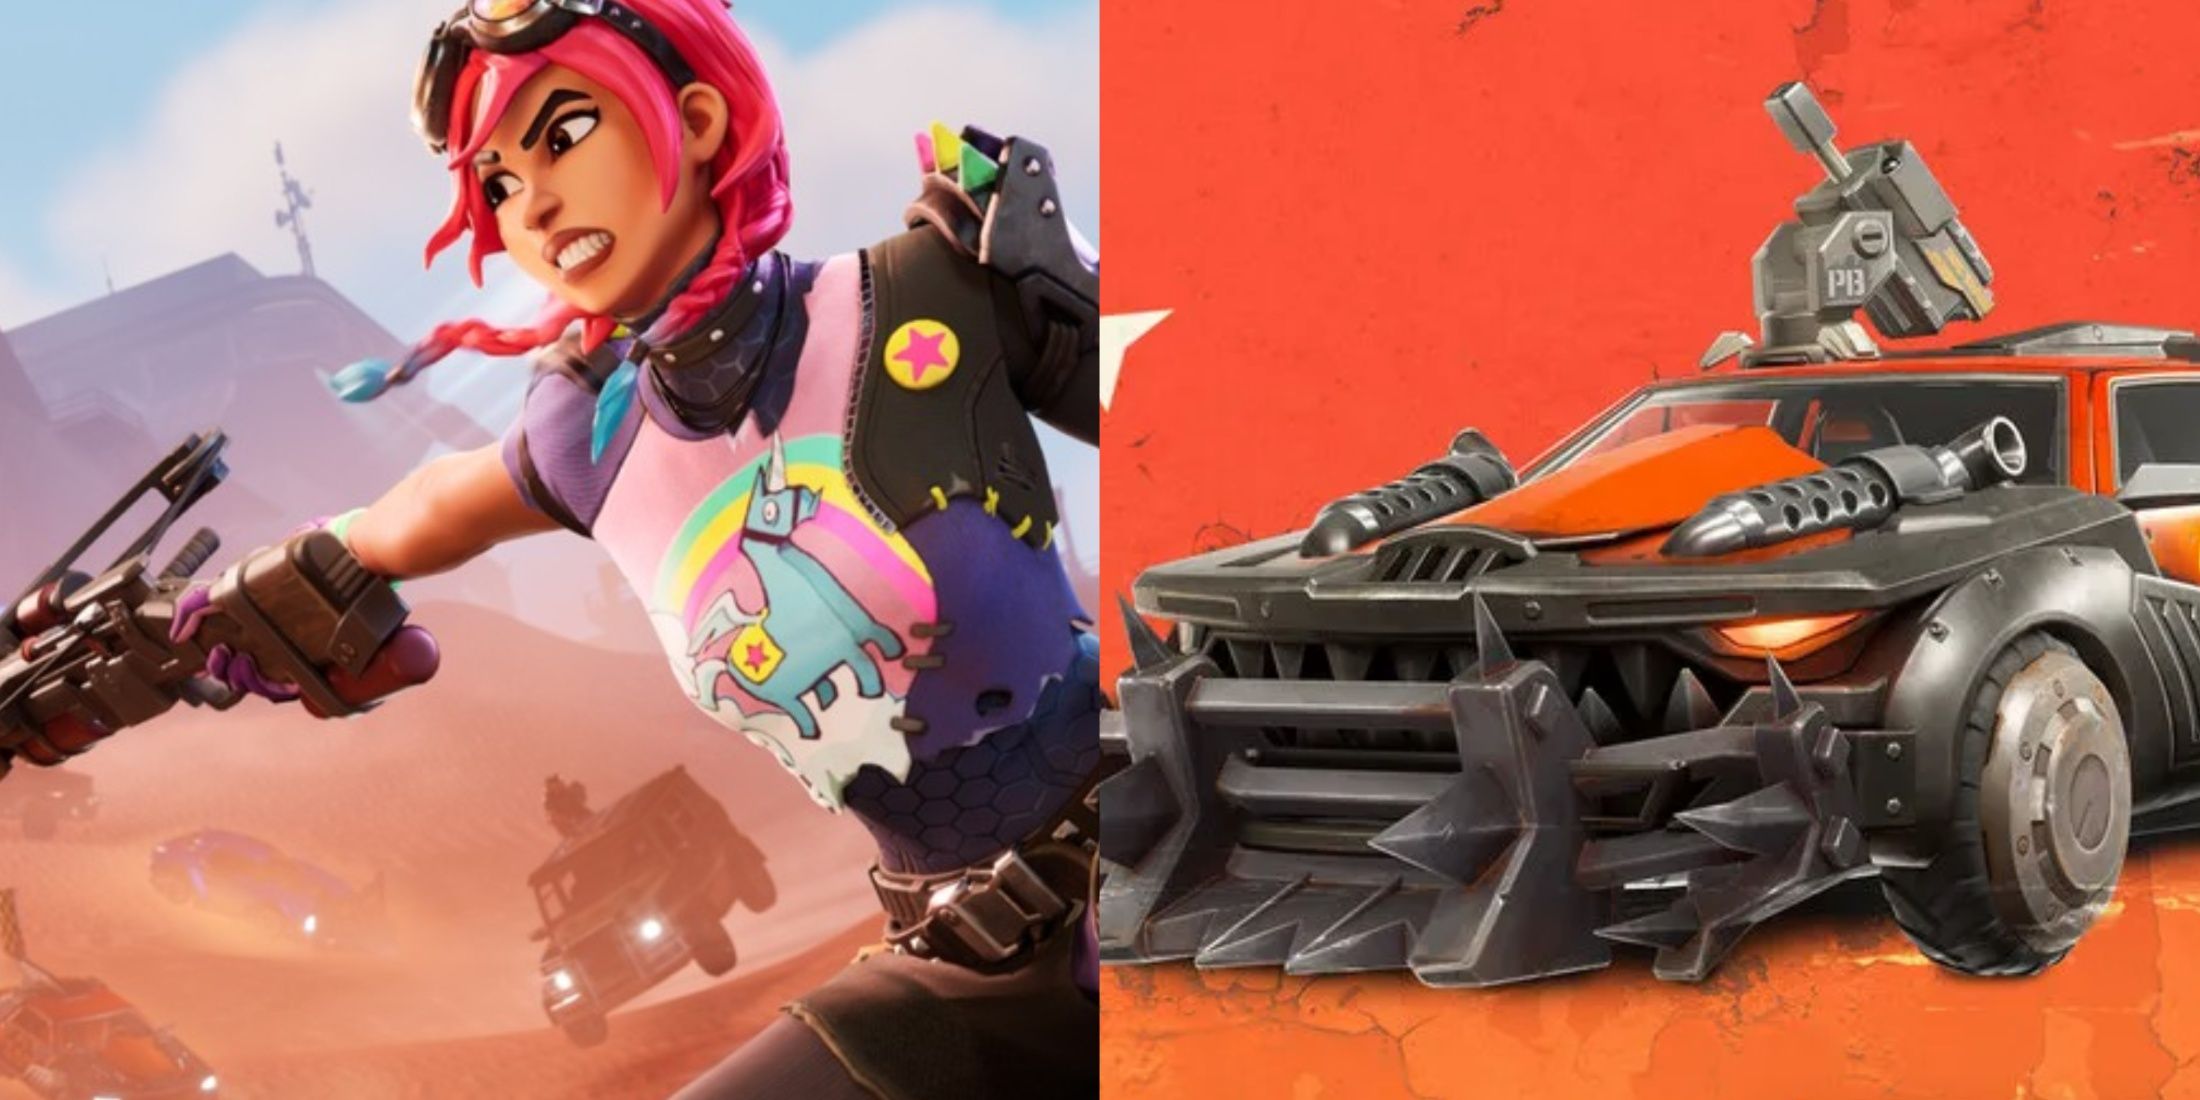 Key art from Fortnite Chapter 5 Season 3 next to a modded vehicle from the game.